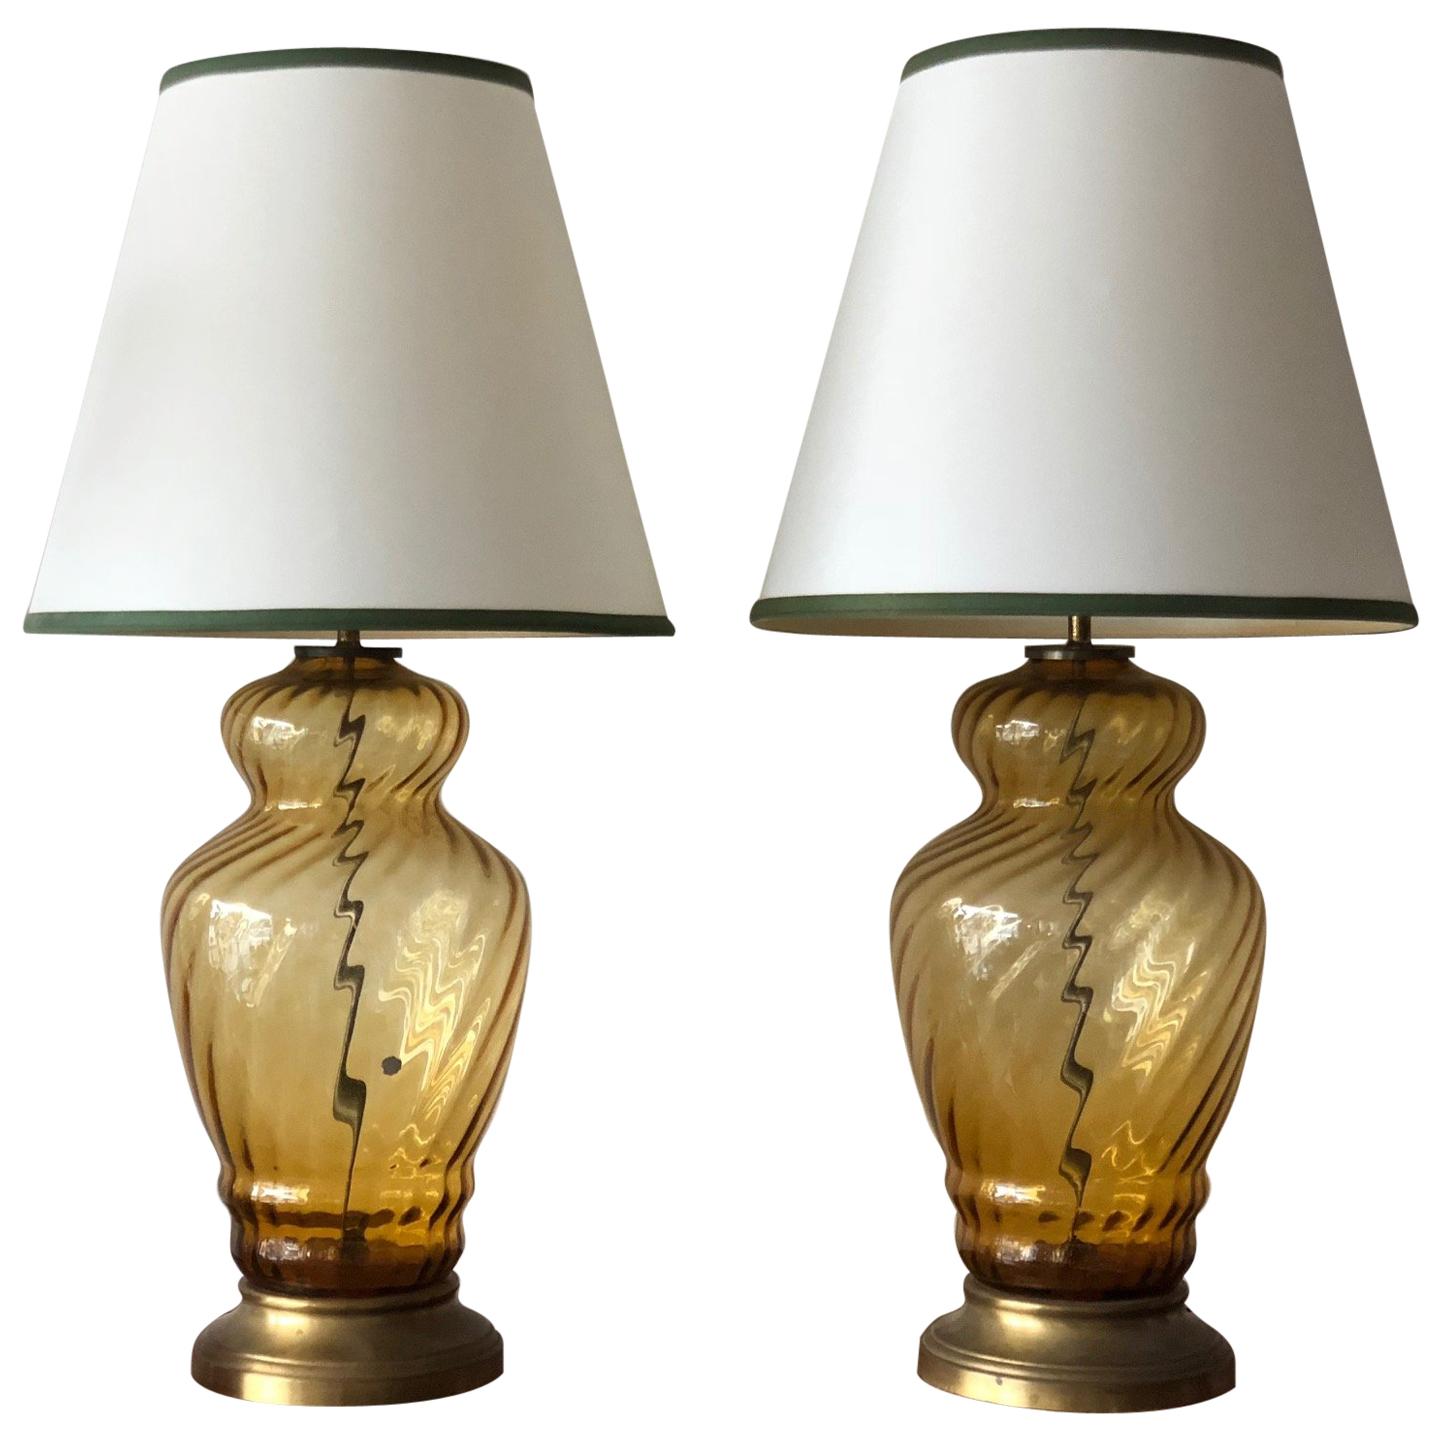 Pair of Large-Scale Glass Lamps Italy, 1950s